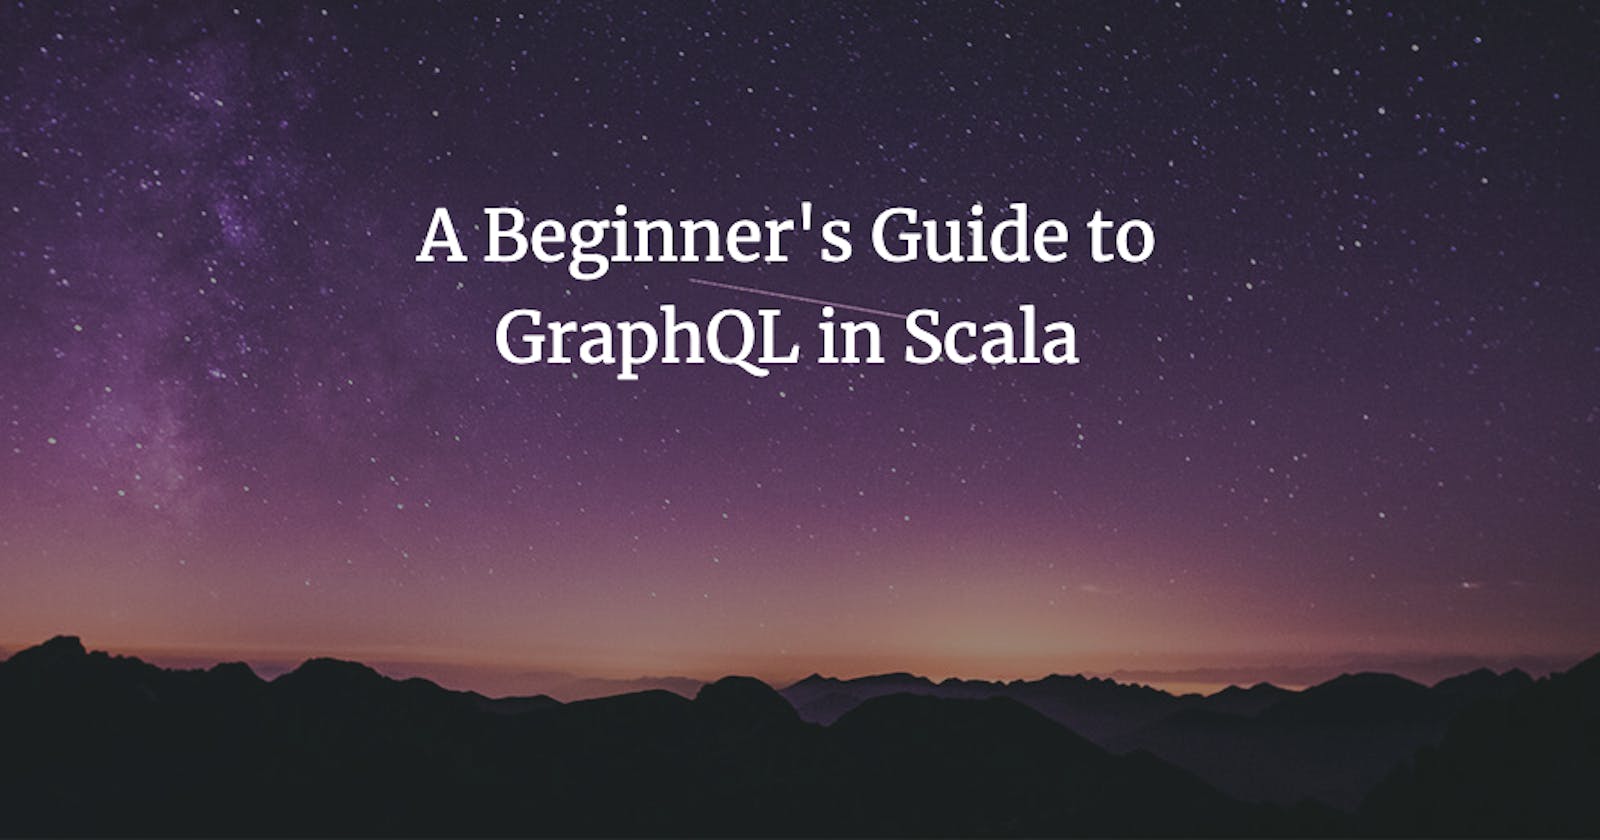 A Beginner's Guide to GraphQL in Scala